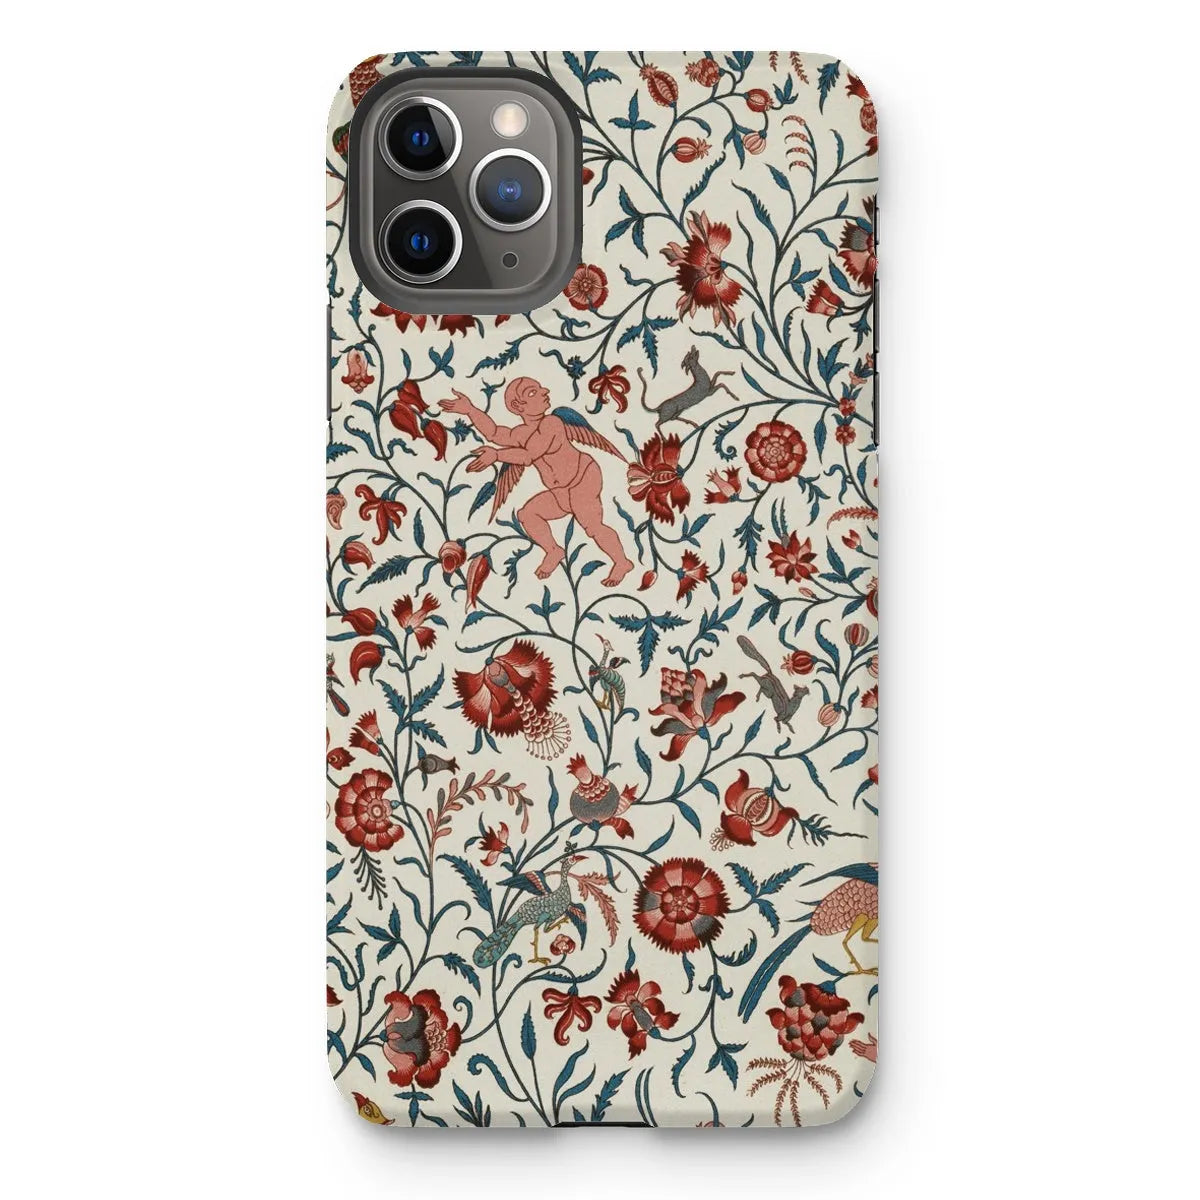 Persian Pattern From L’ornement Polychrome By Auguste Racinet Tough Phone Case - Iphone 11 Pro Max / Matte - Mobile